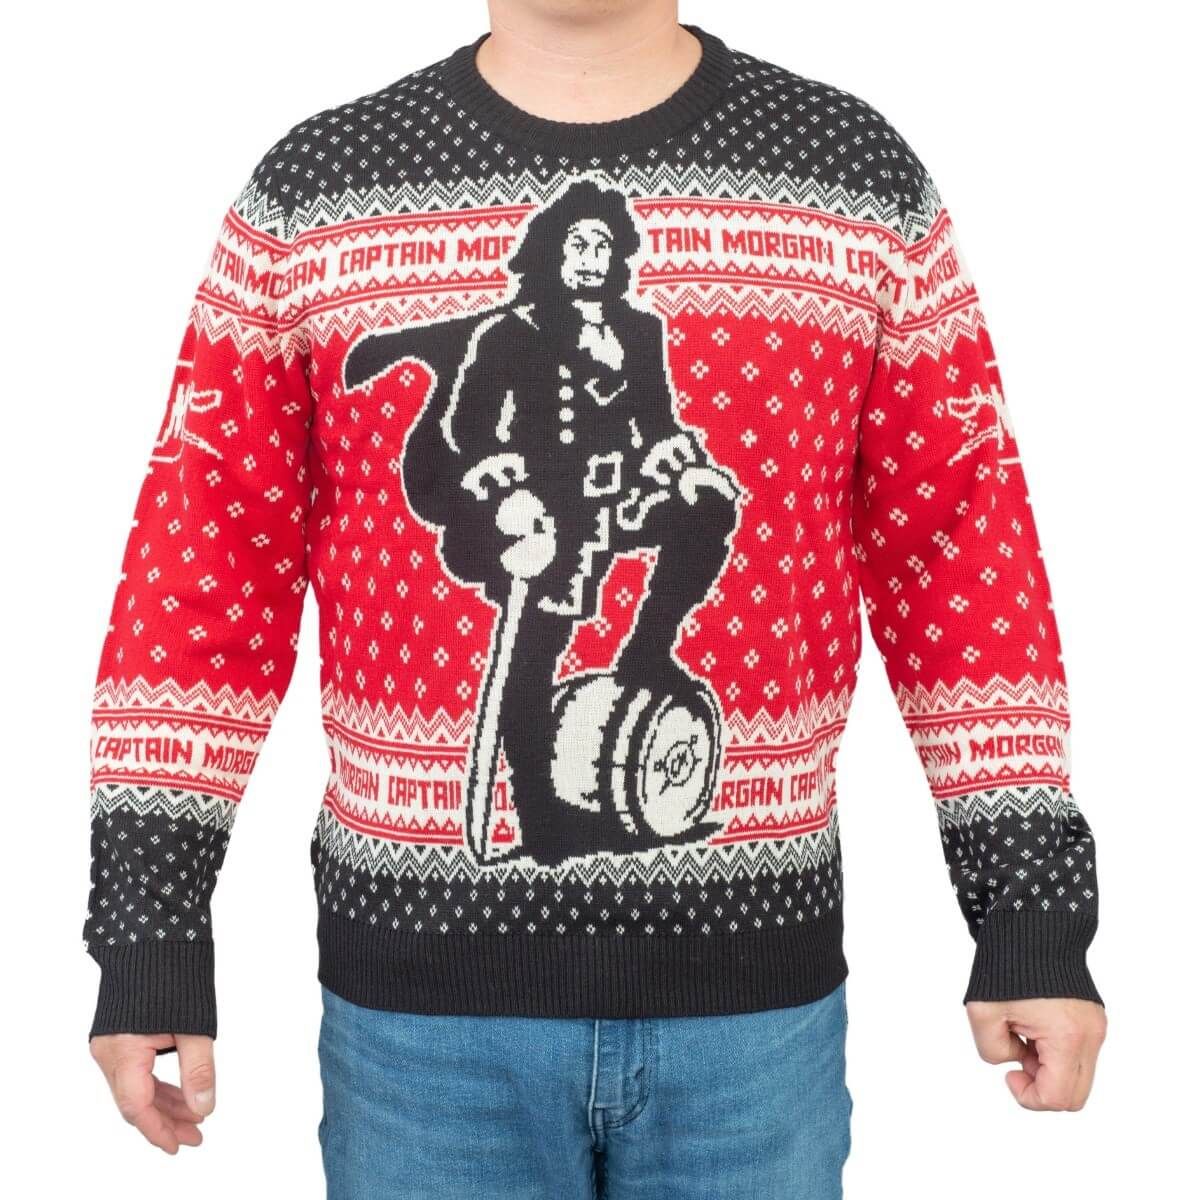 Captain Morgan The Standing Captain Ugly Christmas Sweater, All Over Print Sweatshirt, Ugly Sweater, Christmas Sweaters, Hoodie, Sweater